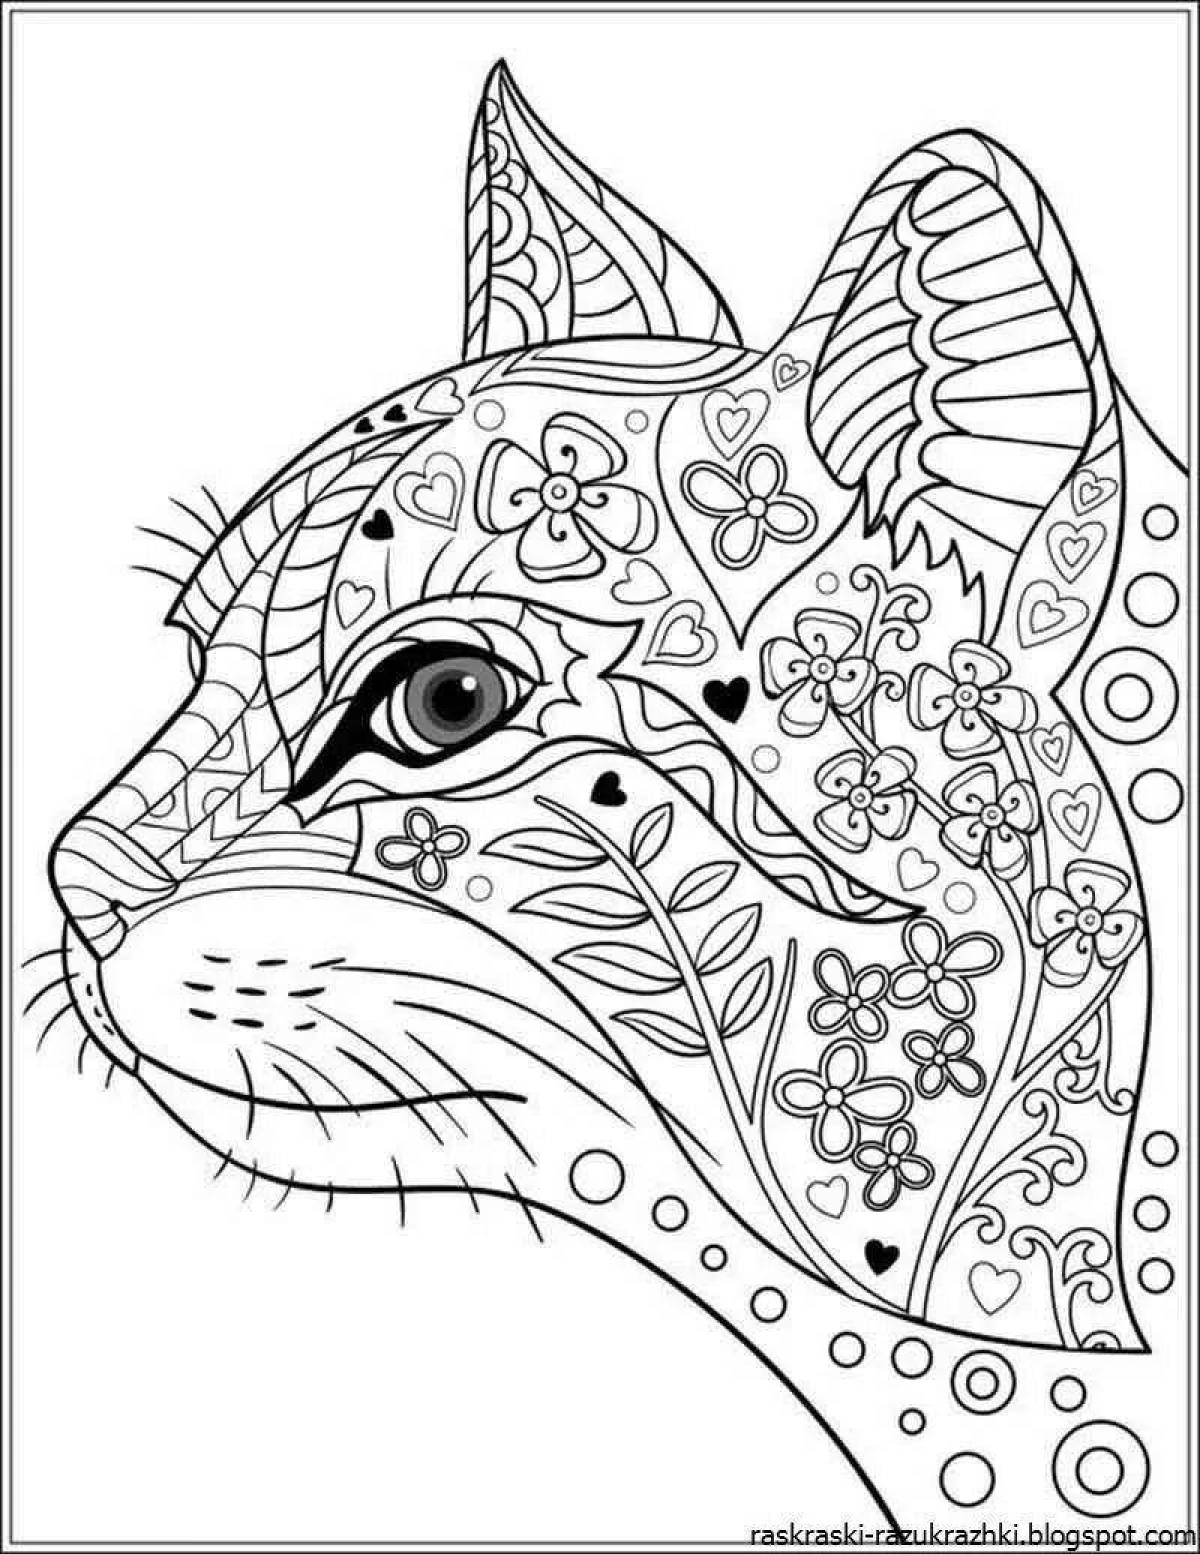 Exquisite coloring book for girls 7 years old